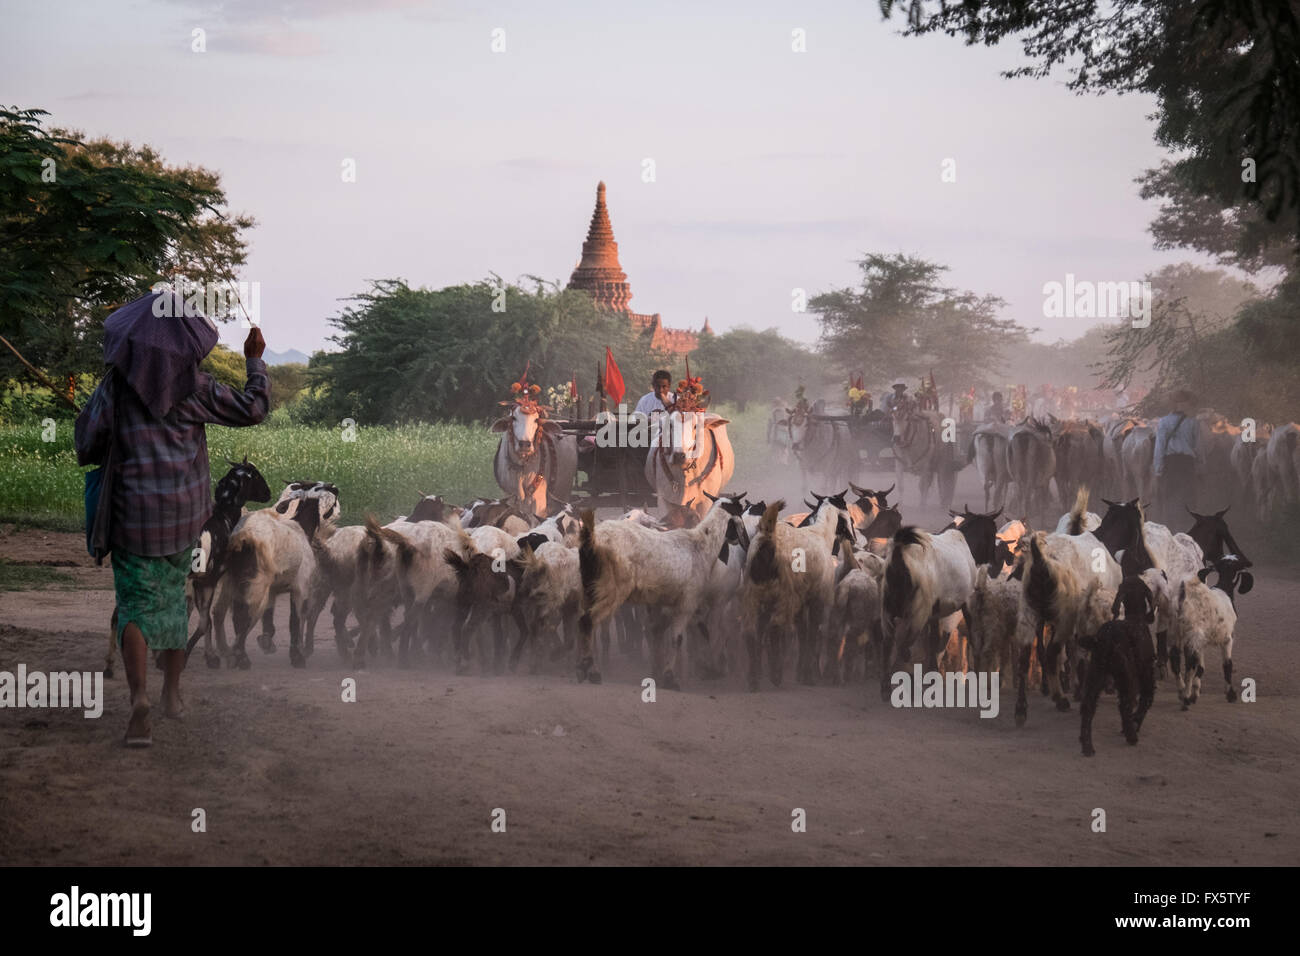 Cattle herders herding their cattle through the dusty dirt roads in Bagan at dusk Stock Photo